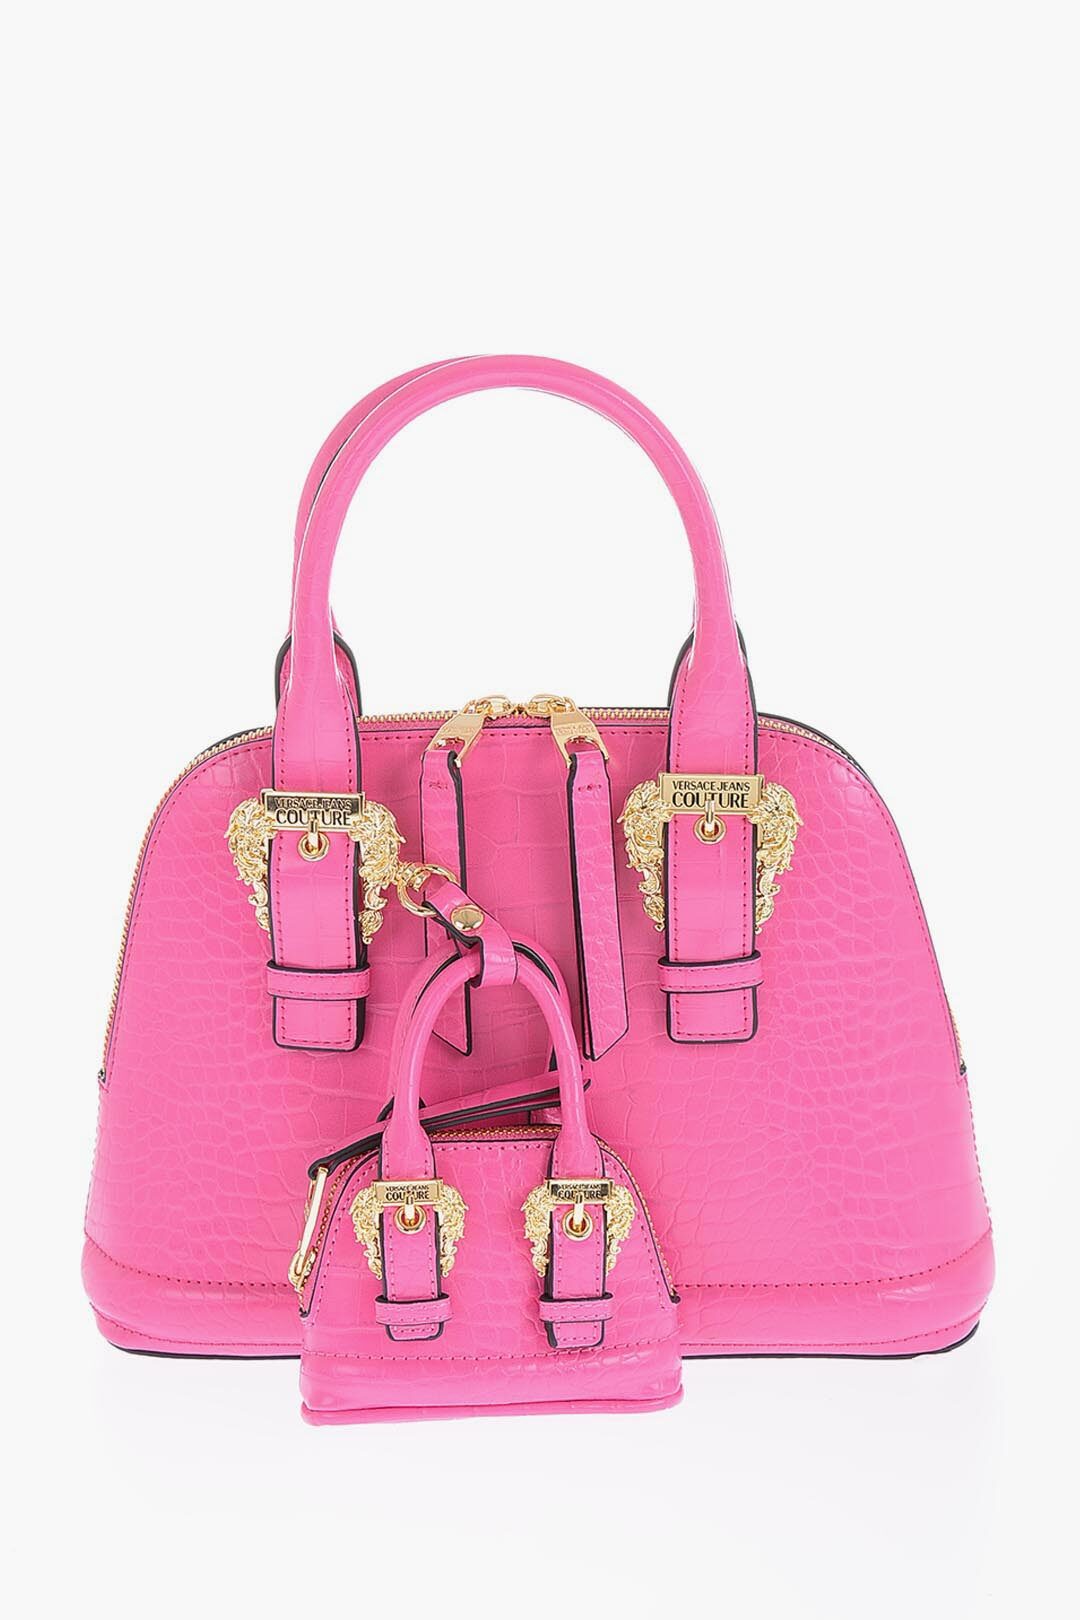 Versace Jeans Couture baroque buckle women's bag in imitation